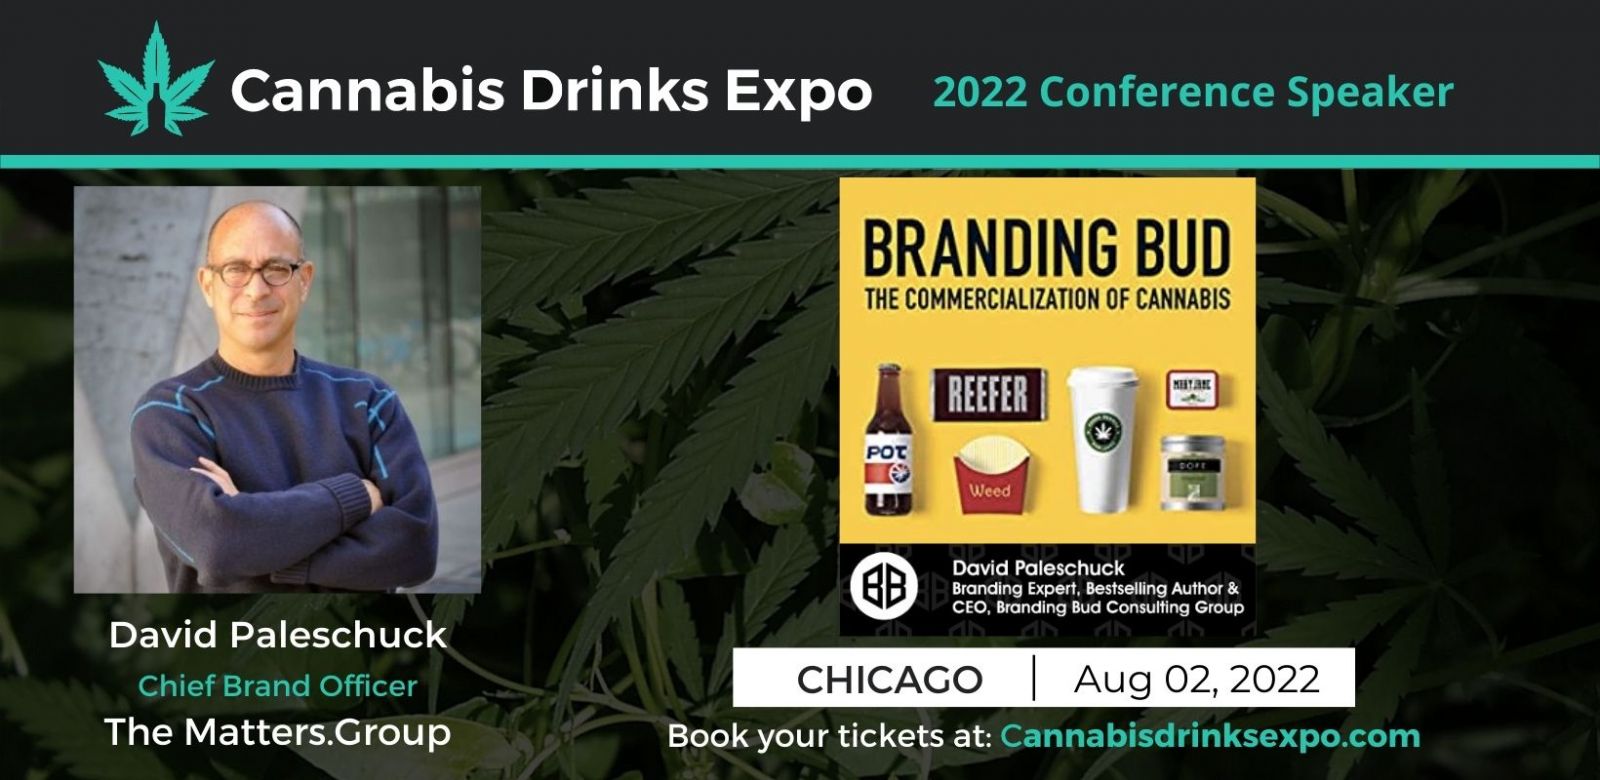 Photo for: David Paleschuck, Cannabis Branding, CPG Branding Expert, Consultant, & Author to speak at CDE 2022.